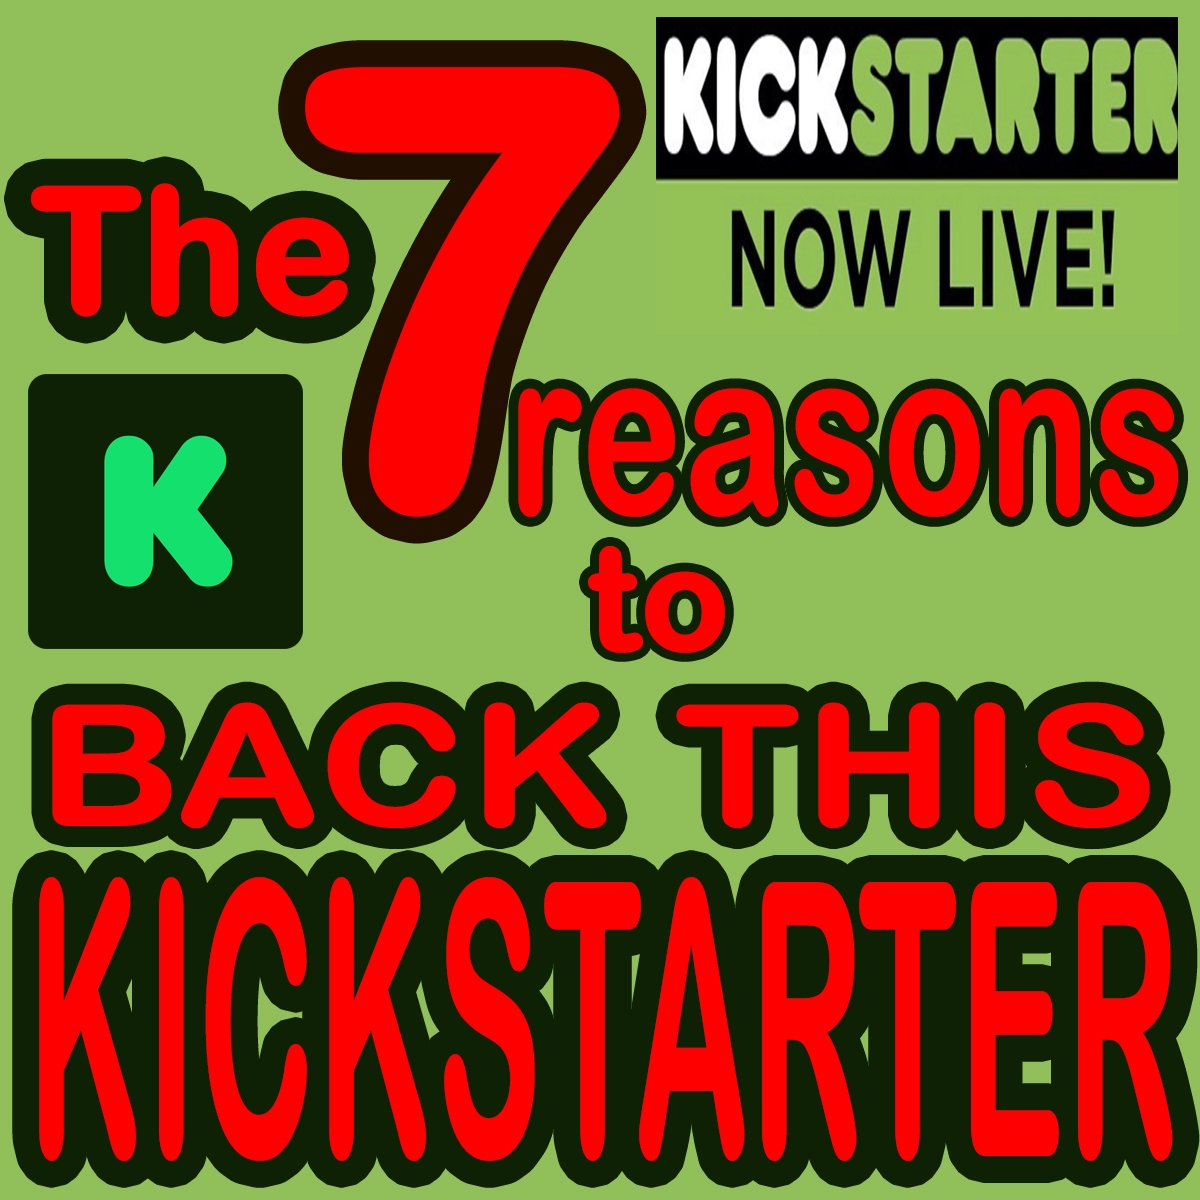 The 7 REASONS to BACK DREAH NOW ON KICKSTARTER